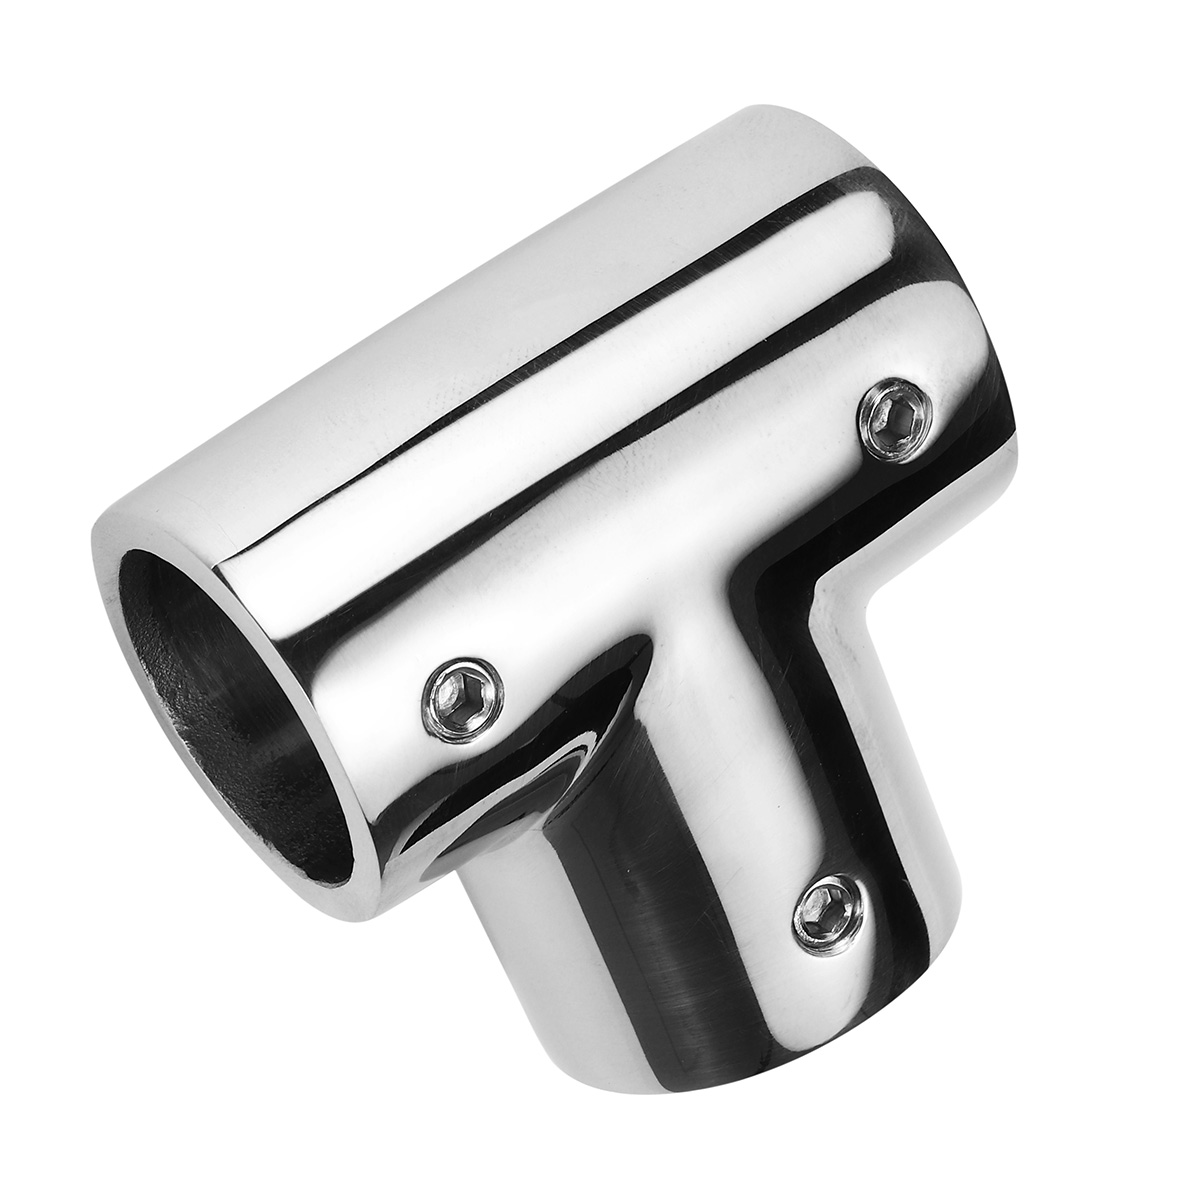 90° 3-Way 316 Stainless Steel Pipe Connector Marine Boat Yacht Railing Handrail